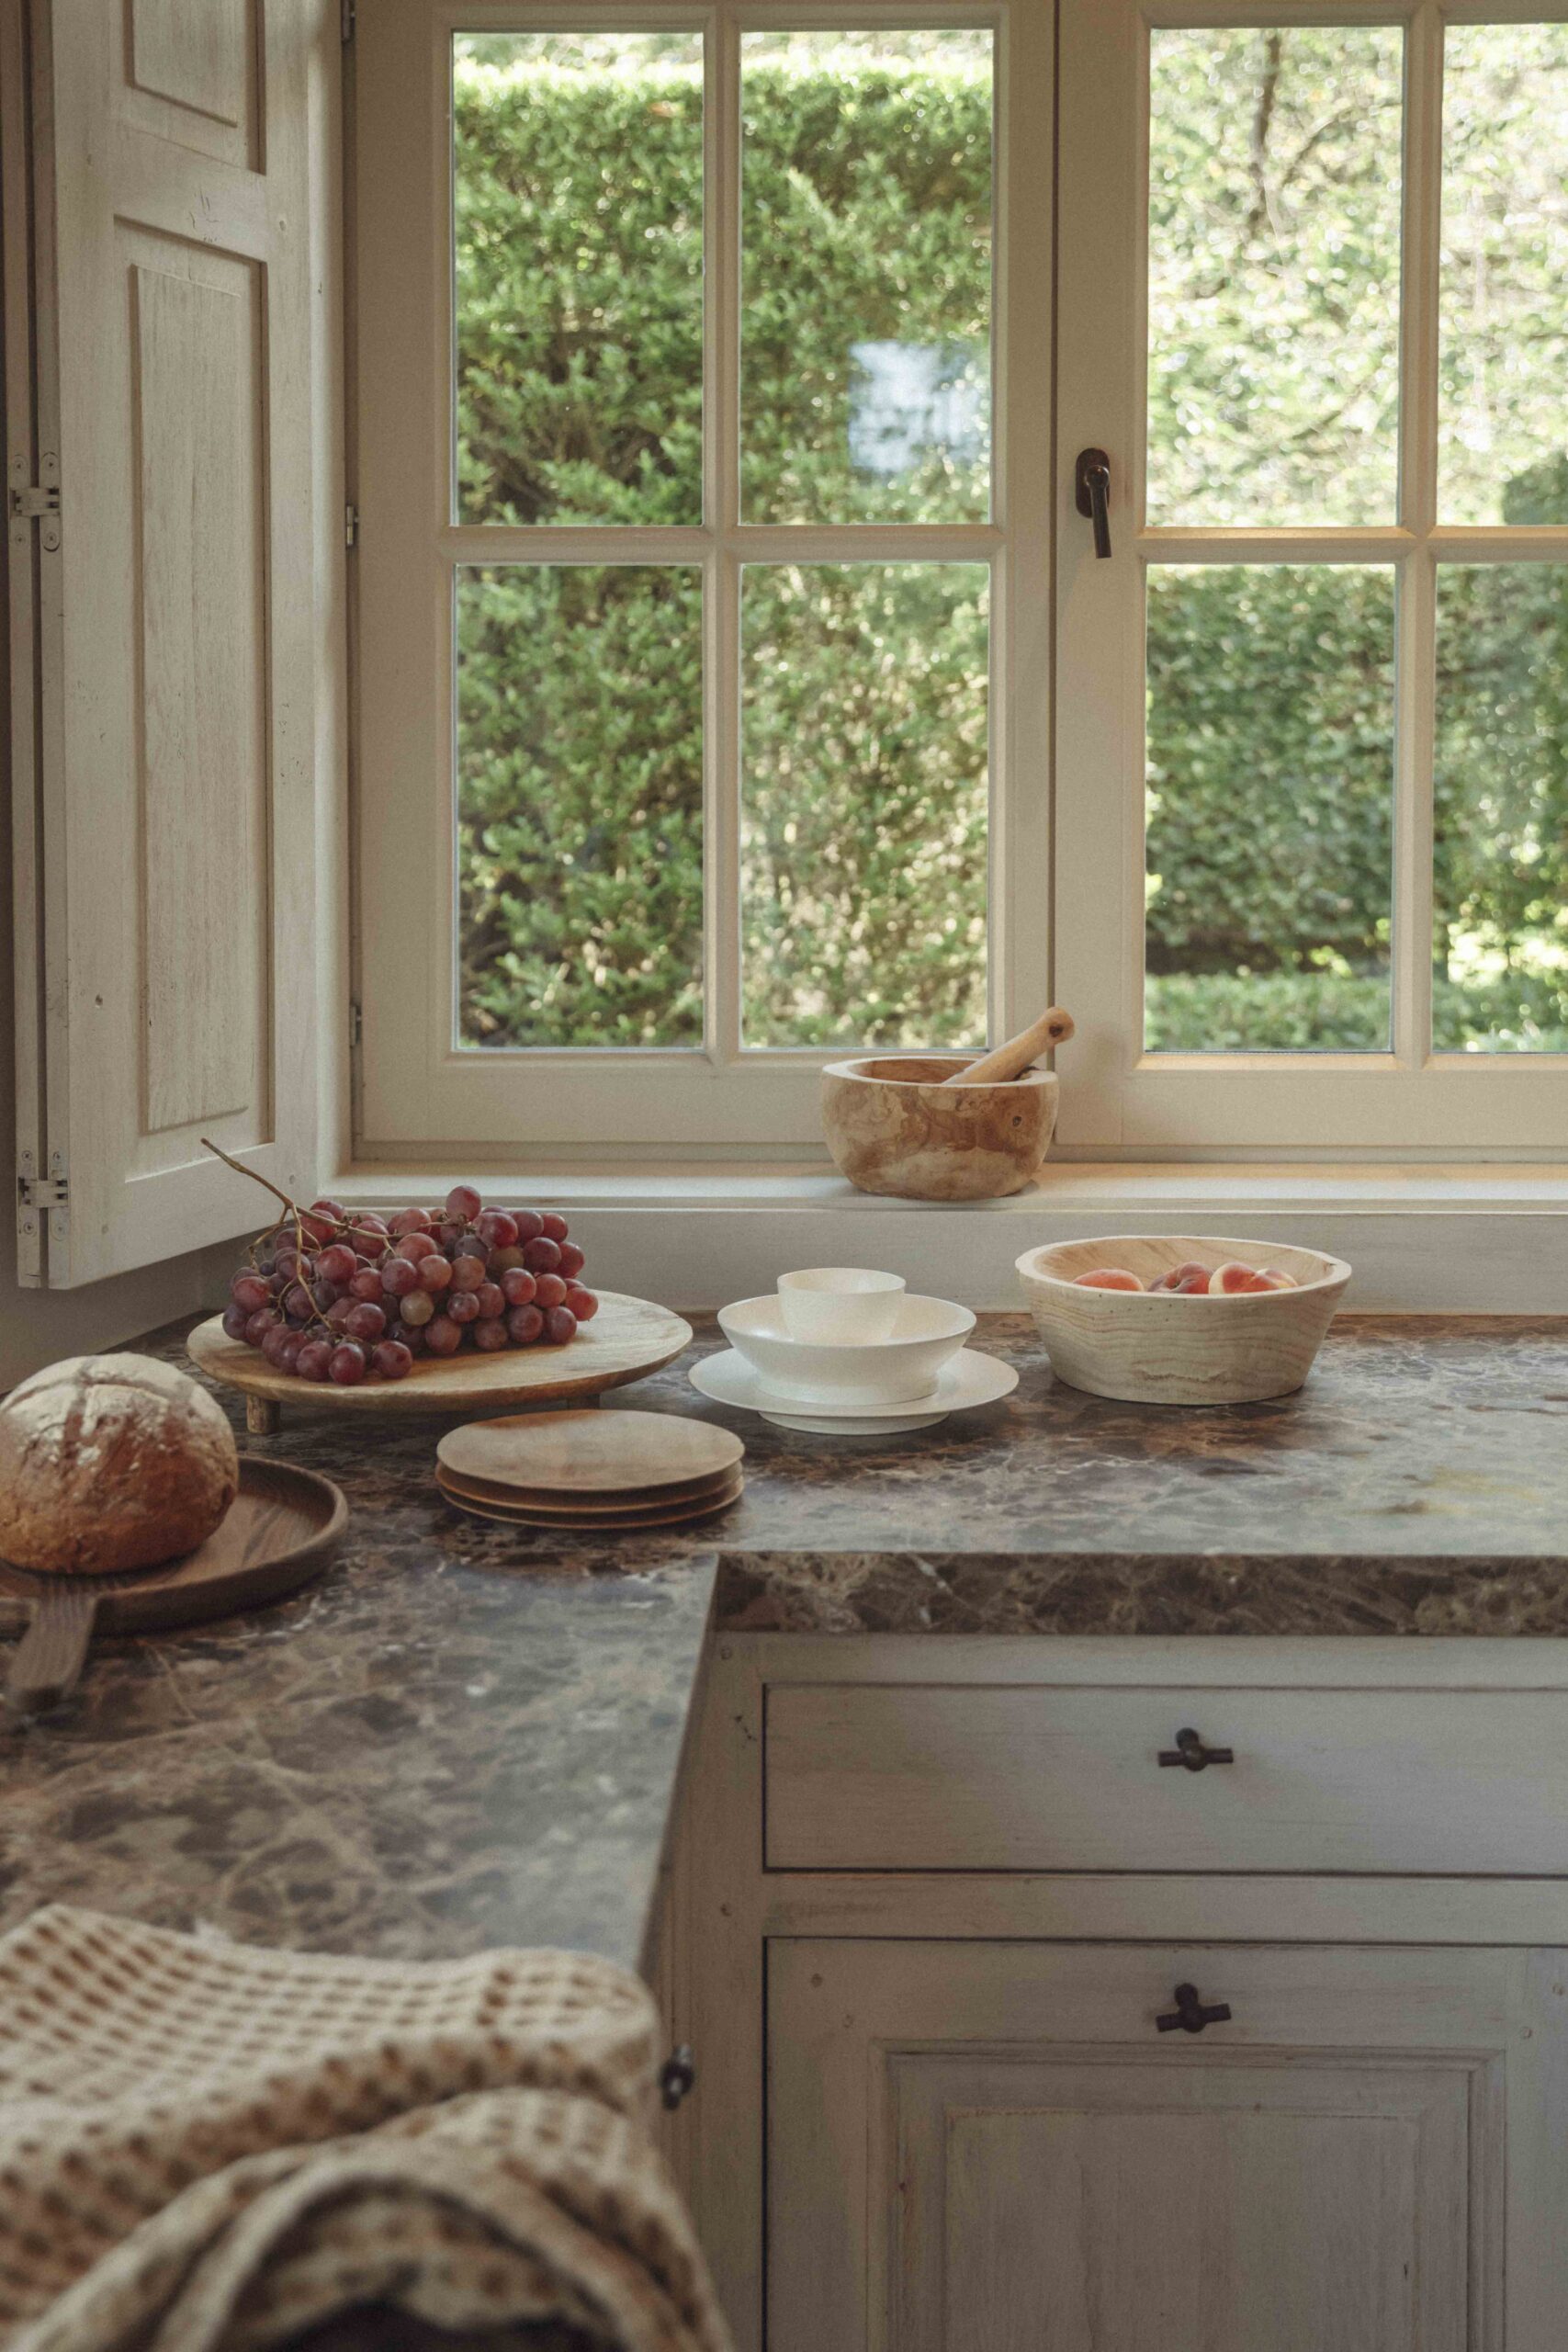 Rustic kitchen with grapes, bread, peaches, and dishes on a marble counter by a window with greenery outside.